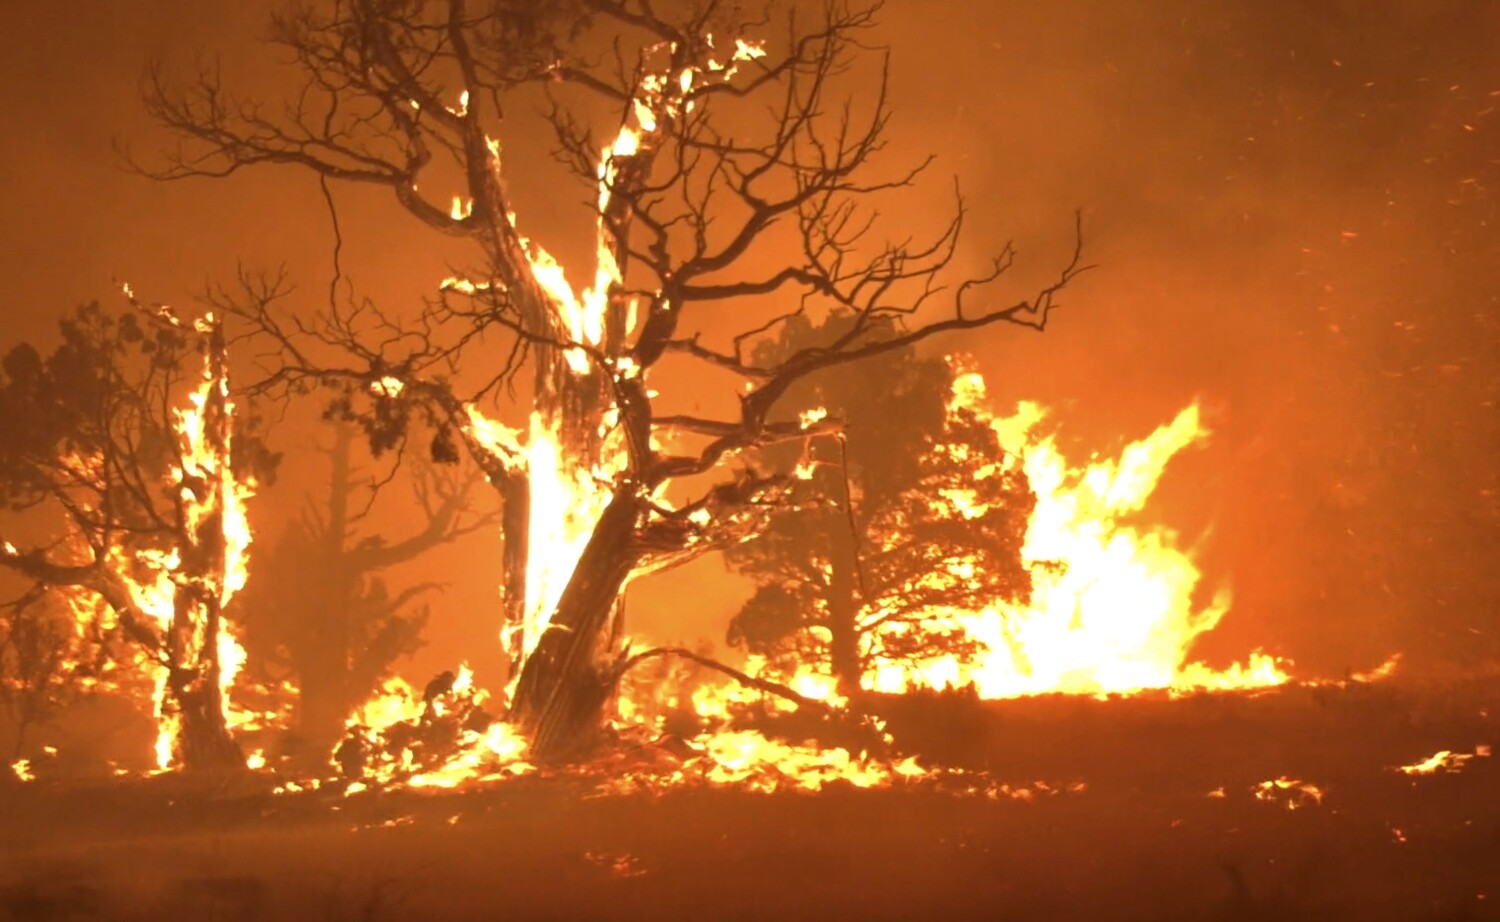 Northern California's Lava fire keeps growing, forcing thousands to flee their homes